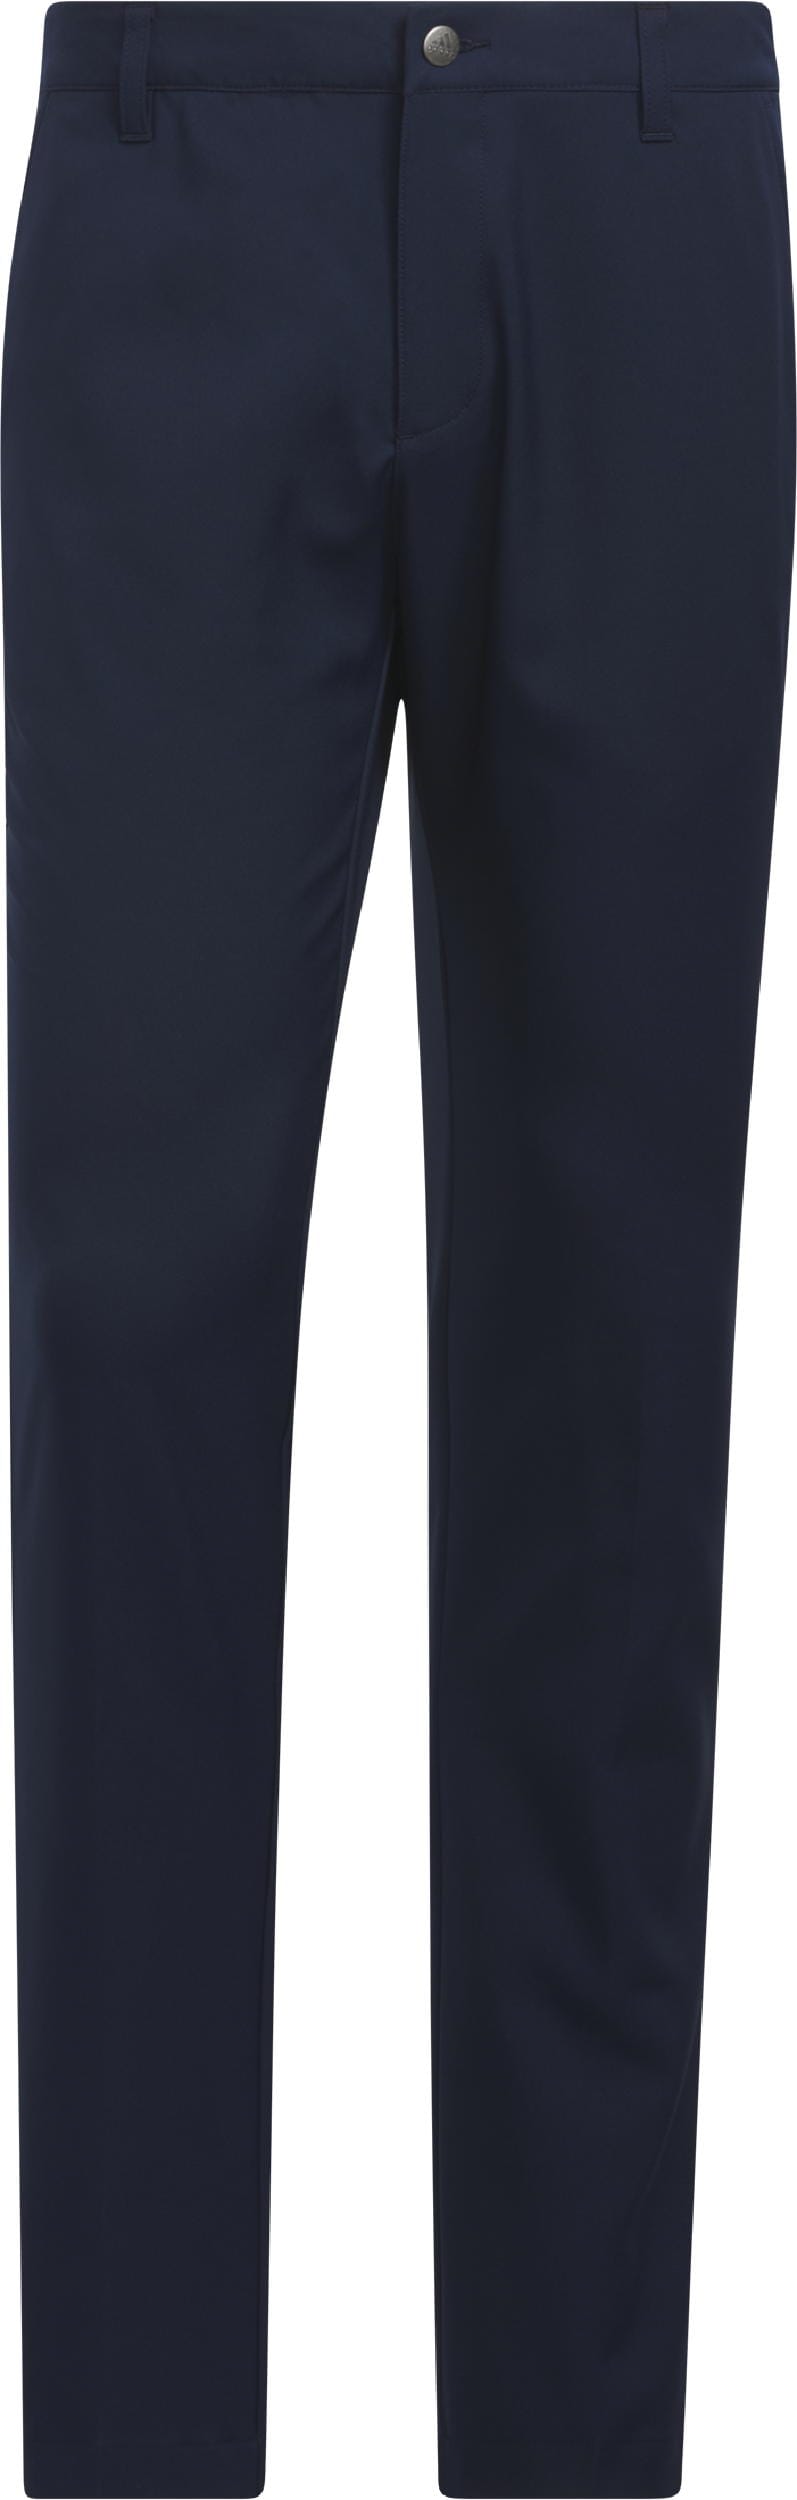 adidas Ulimate365 Primegreen Tapered Golfhose, navy